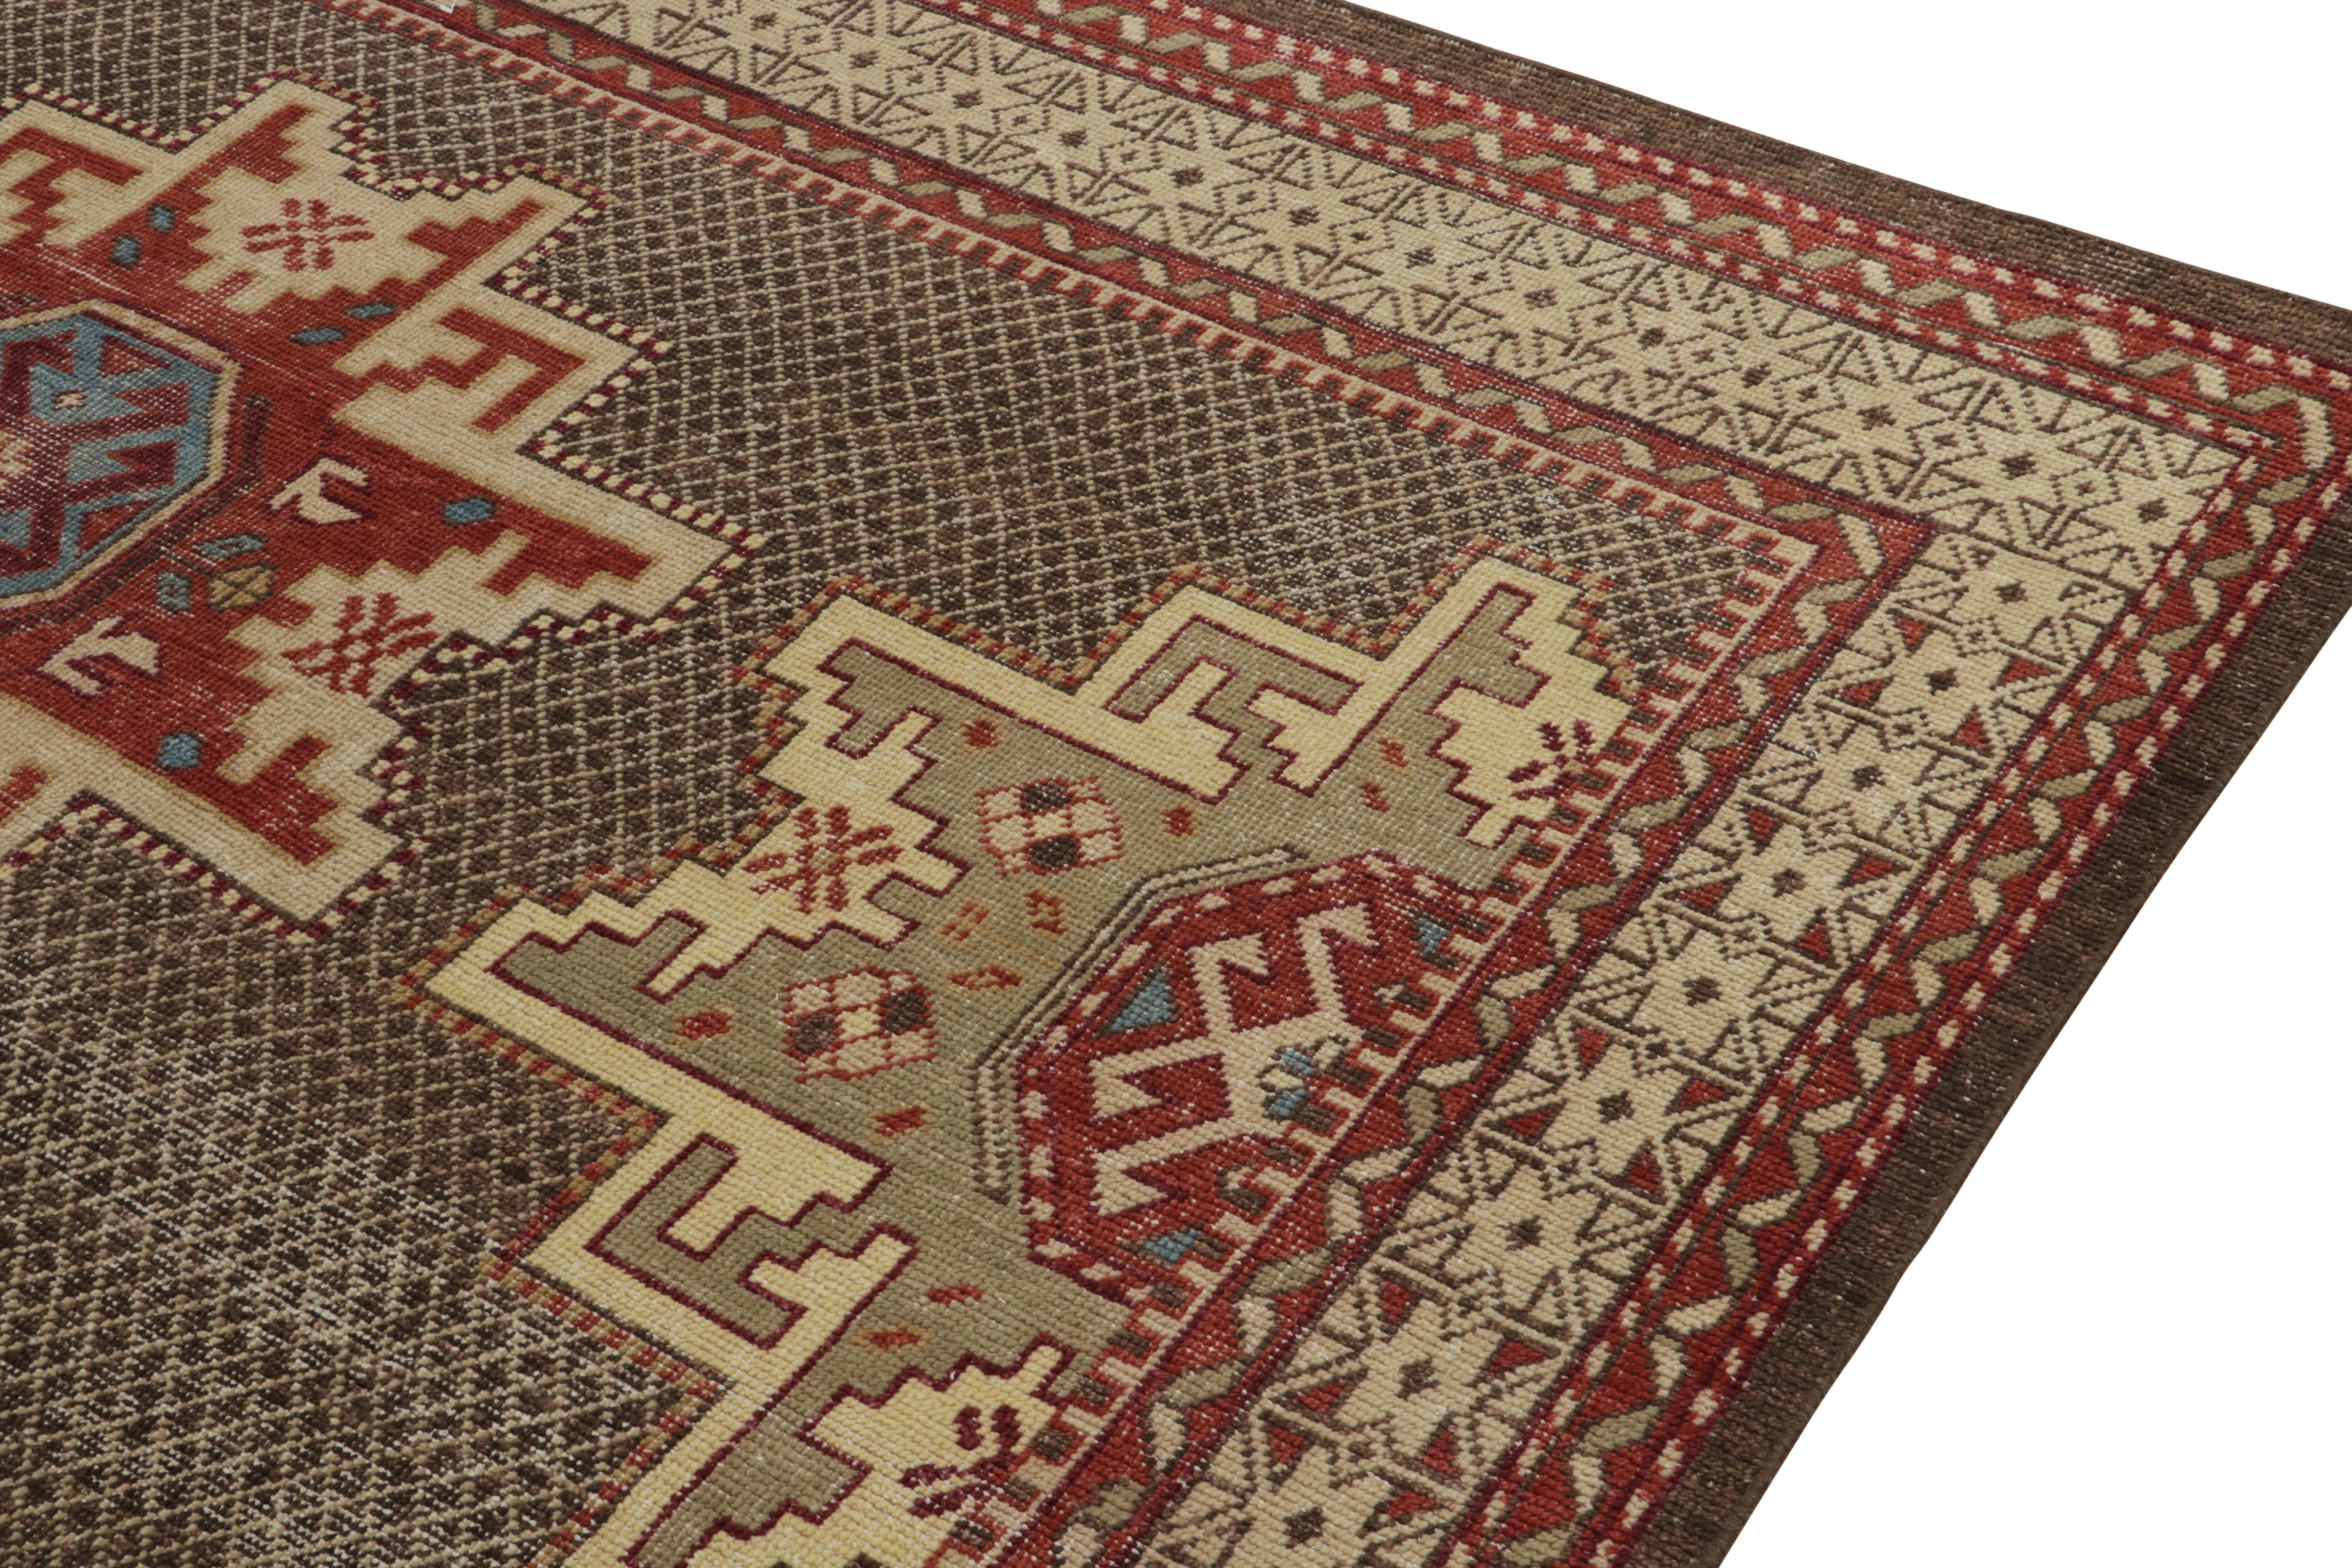 Hand-Knotted Rug & Kilim's Distressed Kuba Style Rug in Red, Beige-Brown Medallions For Sale